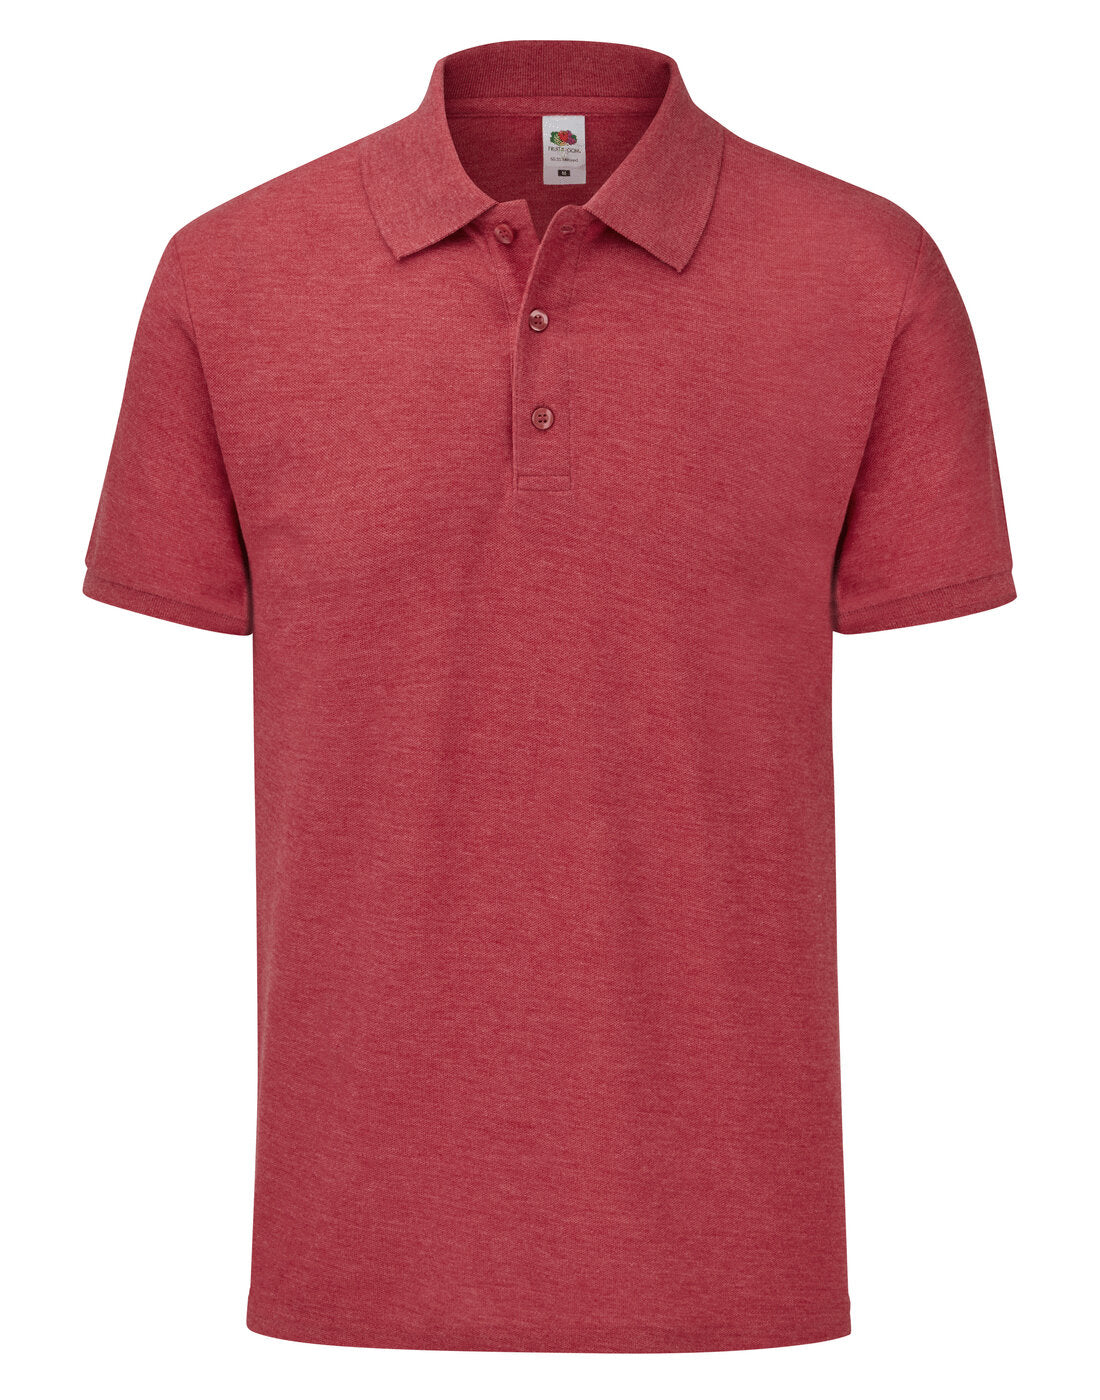 Fruit of the Loom 65/35 Tailored Fit Polo - Vintage Heather Red